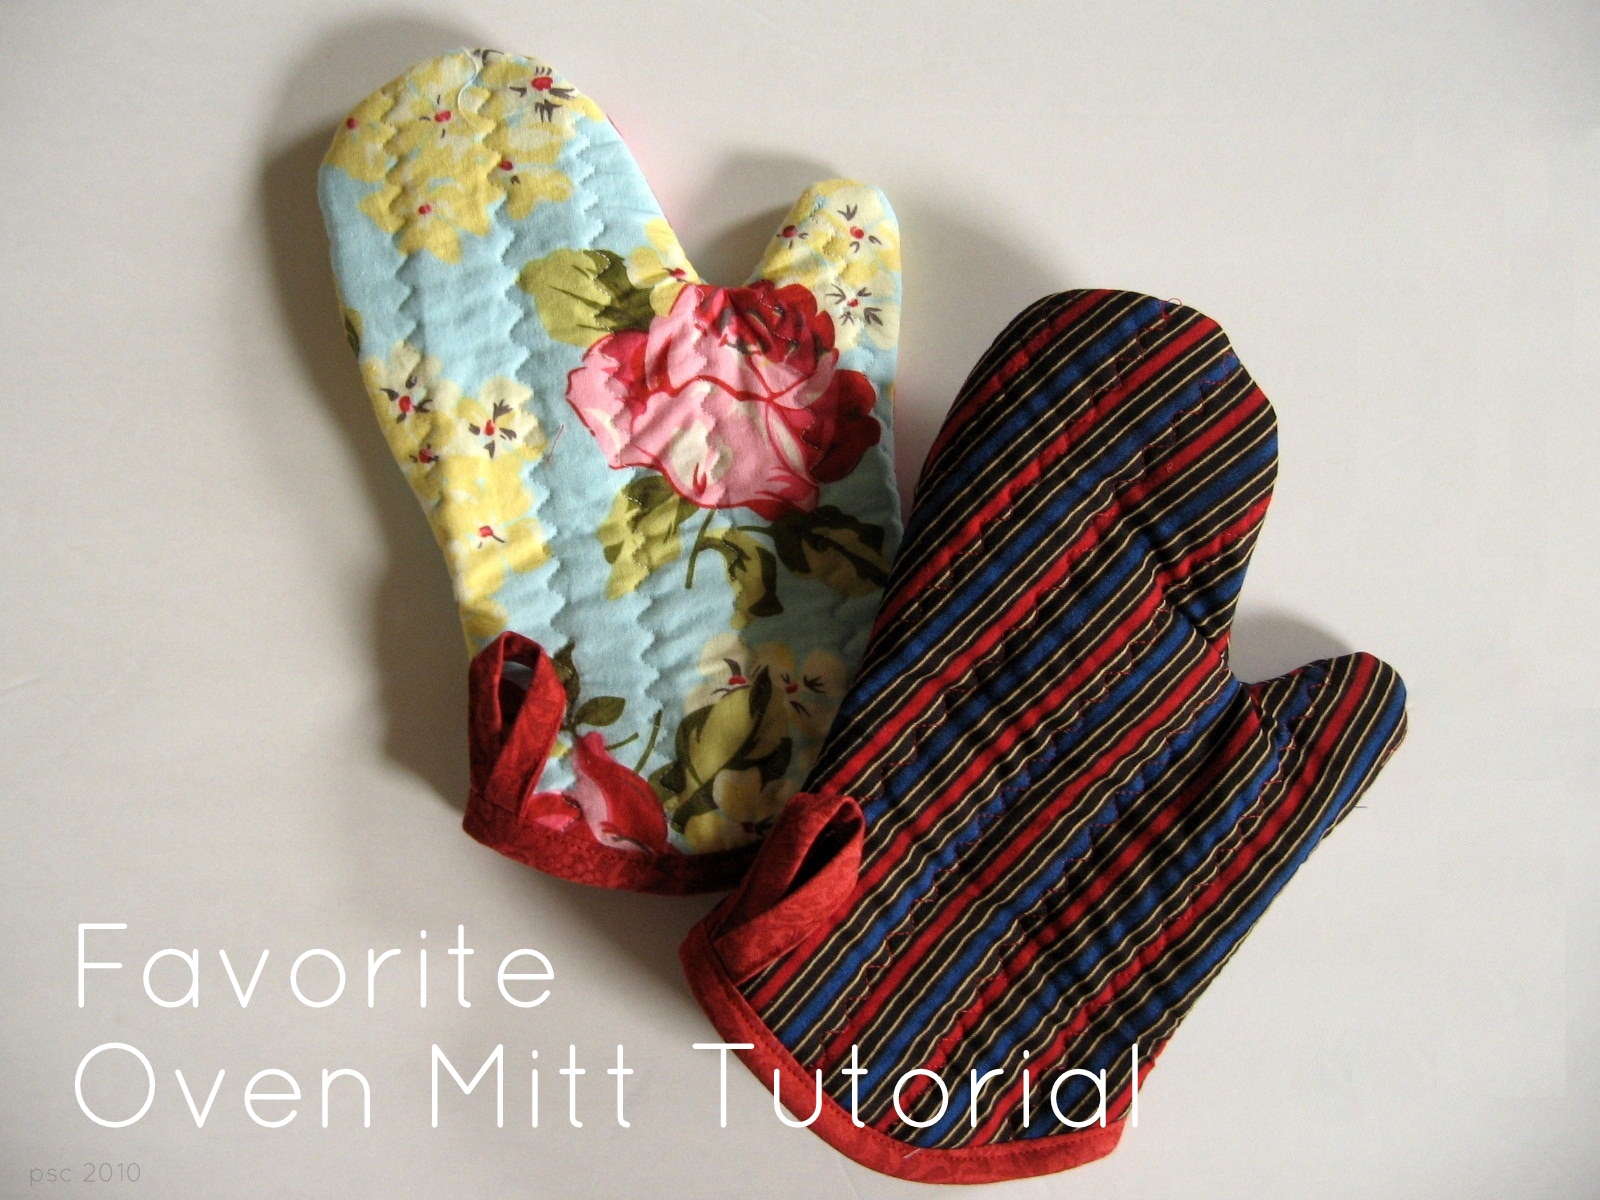 pickup-some-creativity-favorite-oven-mitt-tutorial-with-free-template